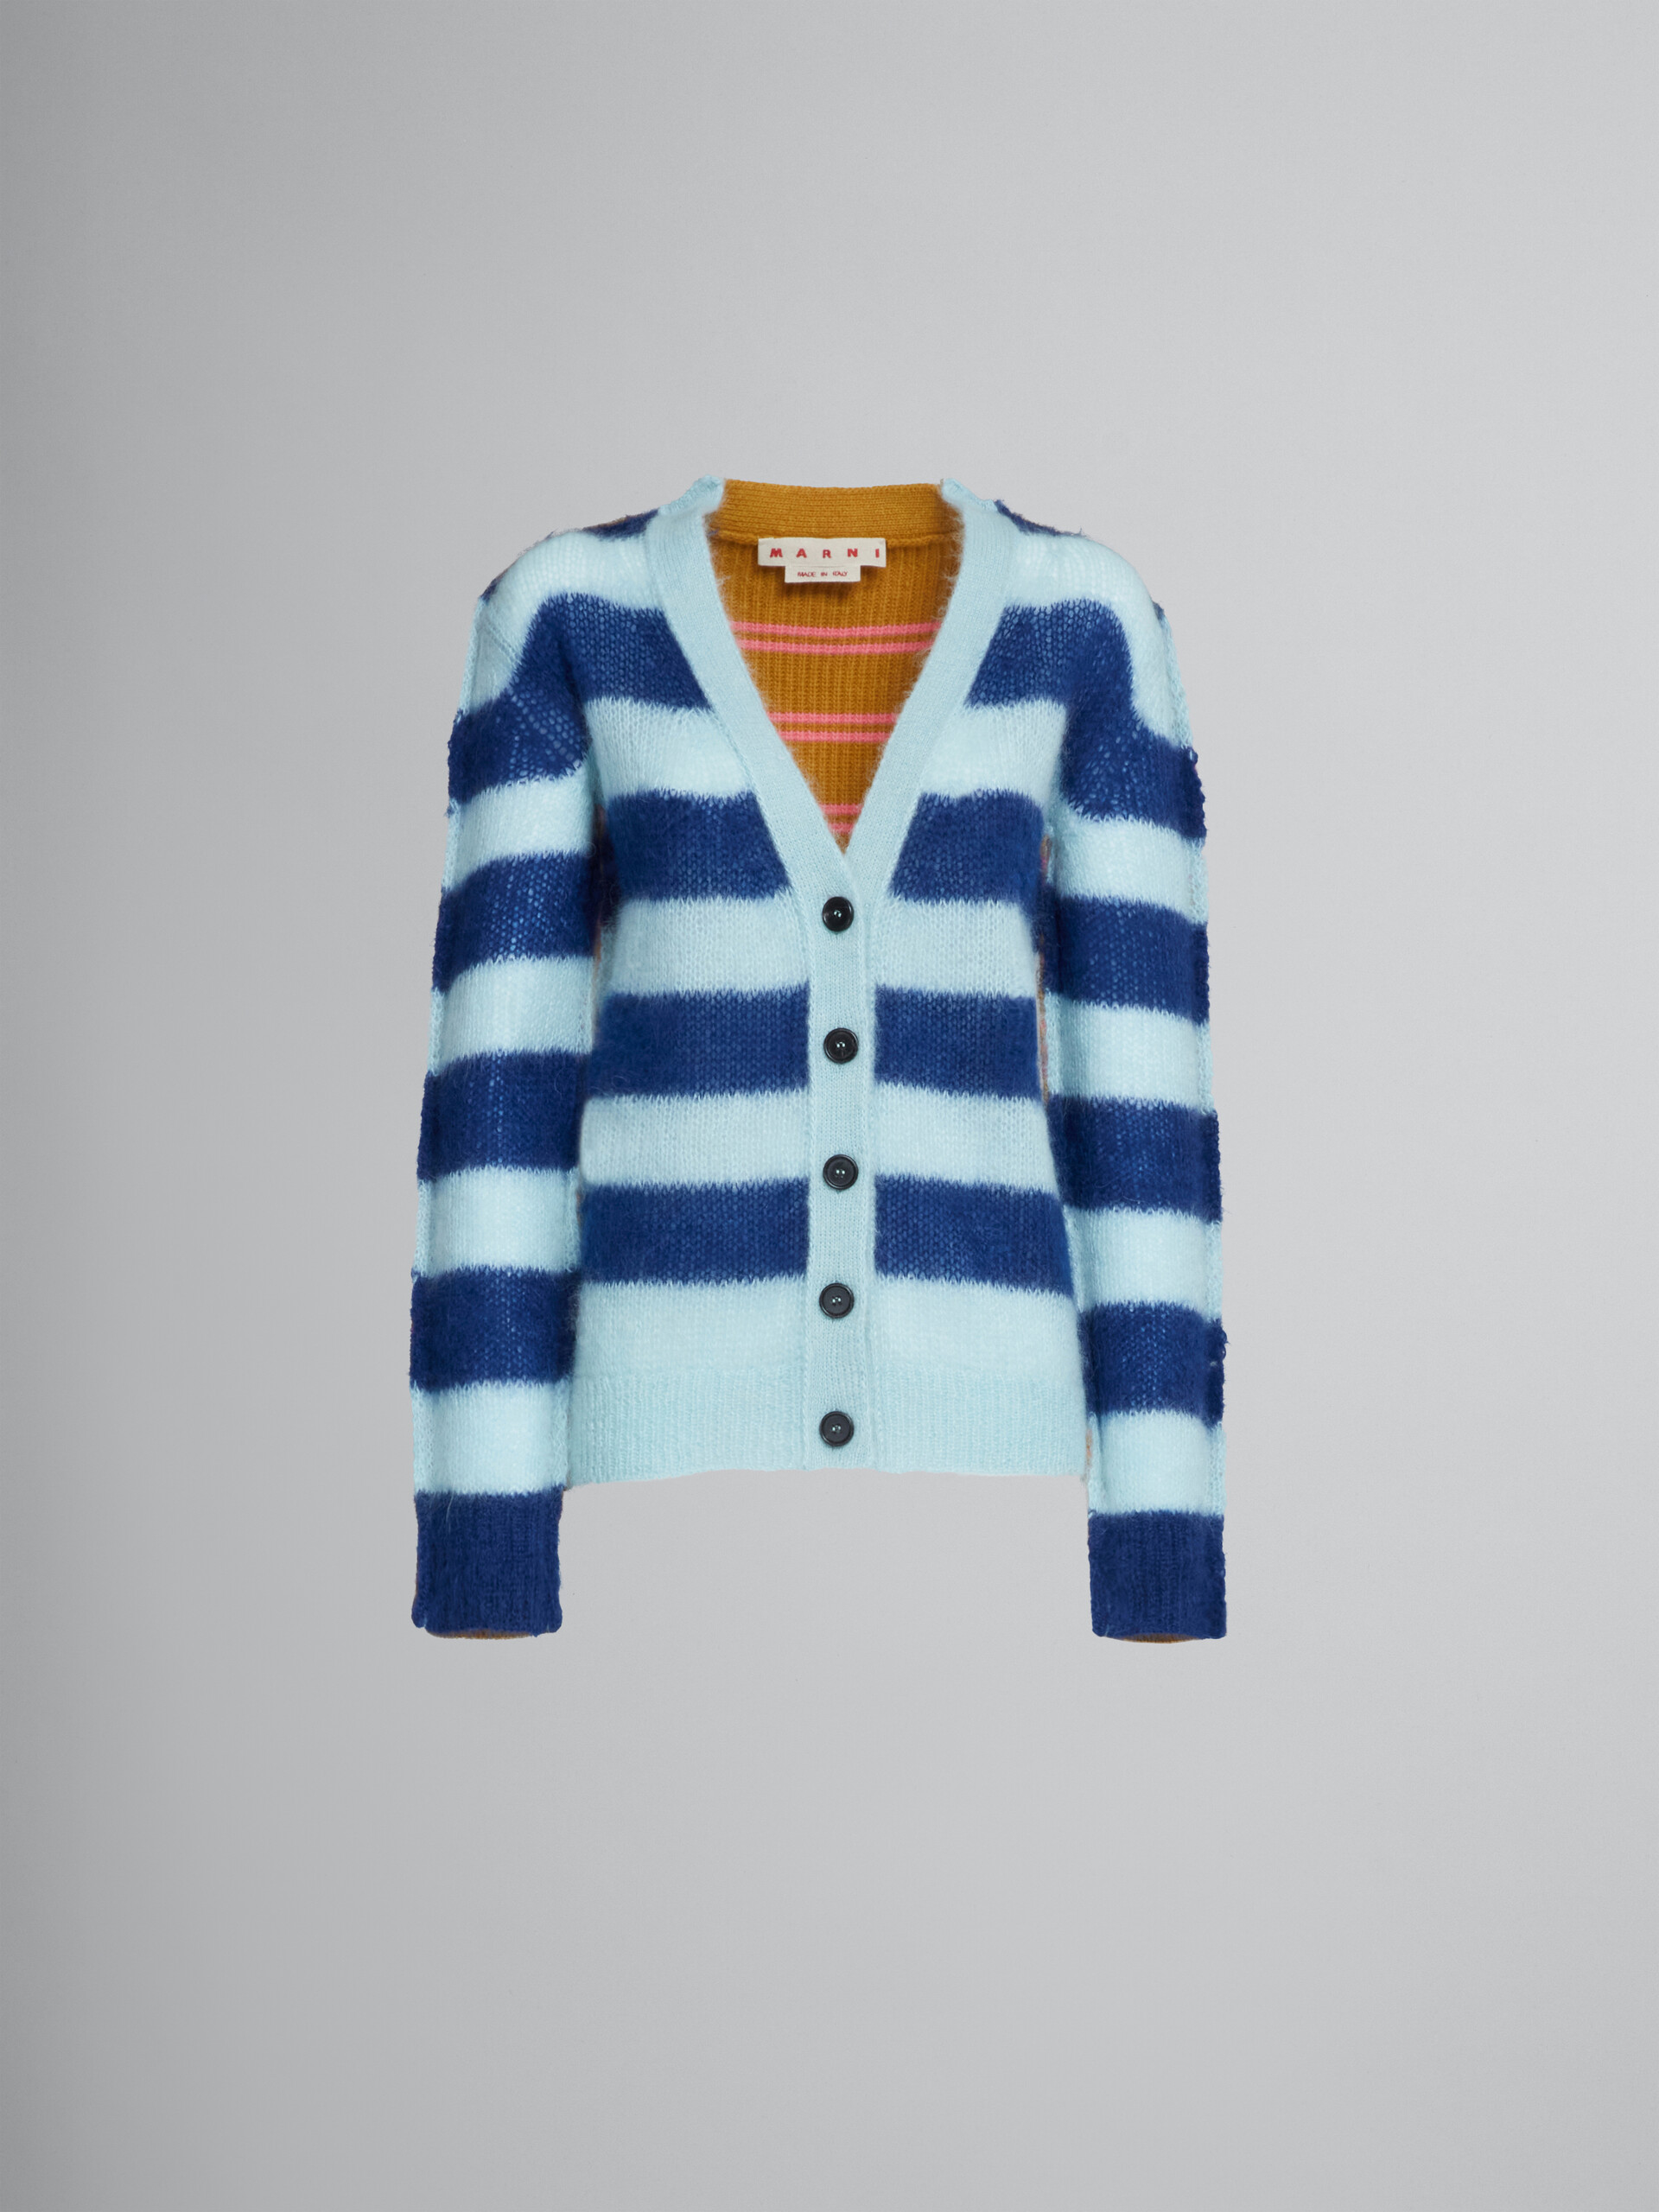 Mohair and wool cardigan with multicolour stripes - Pullovers - Image 1